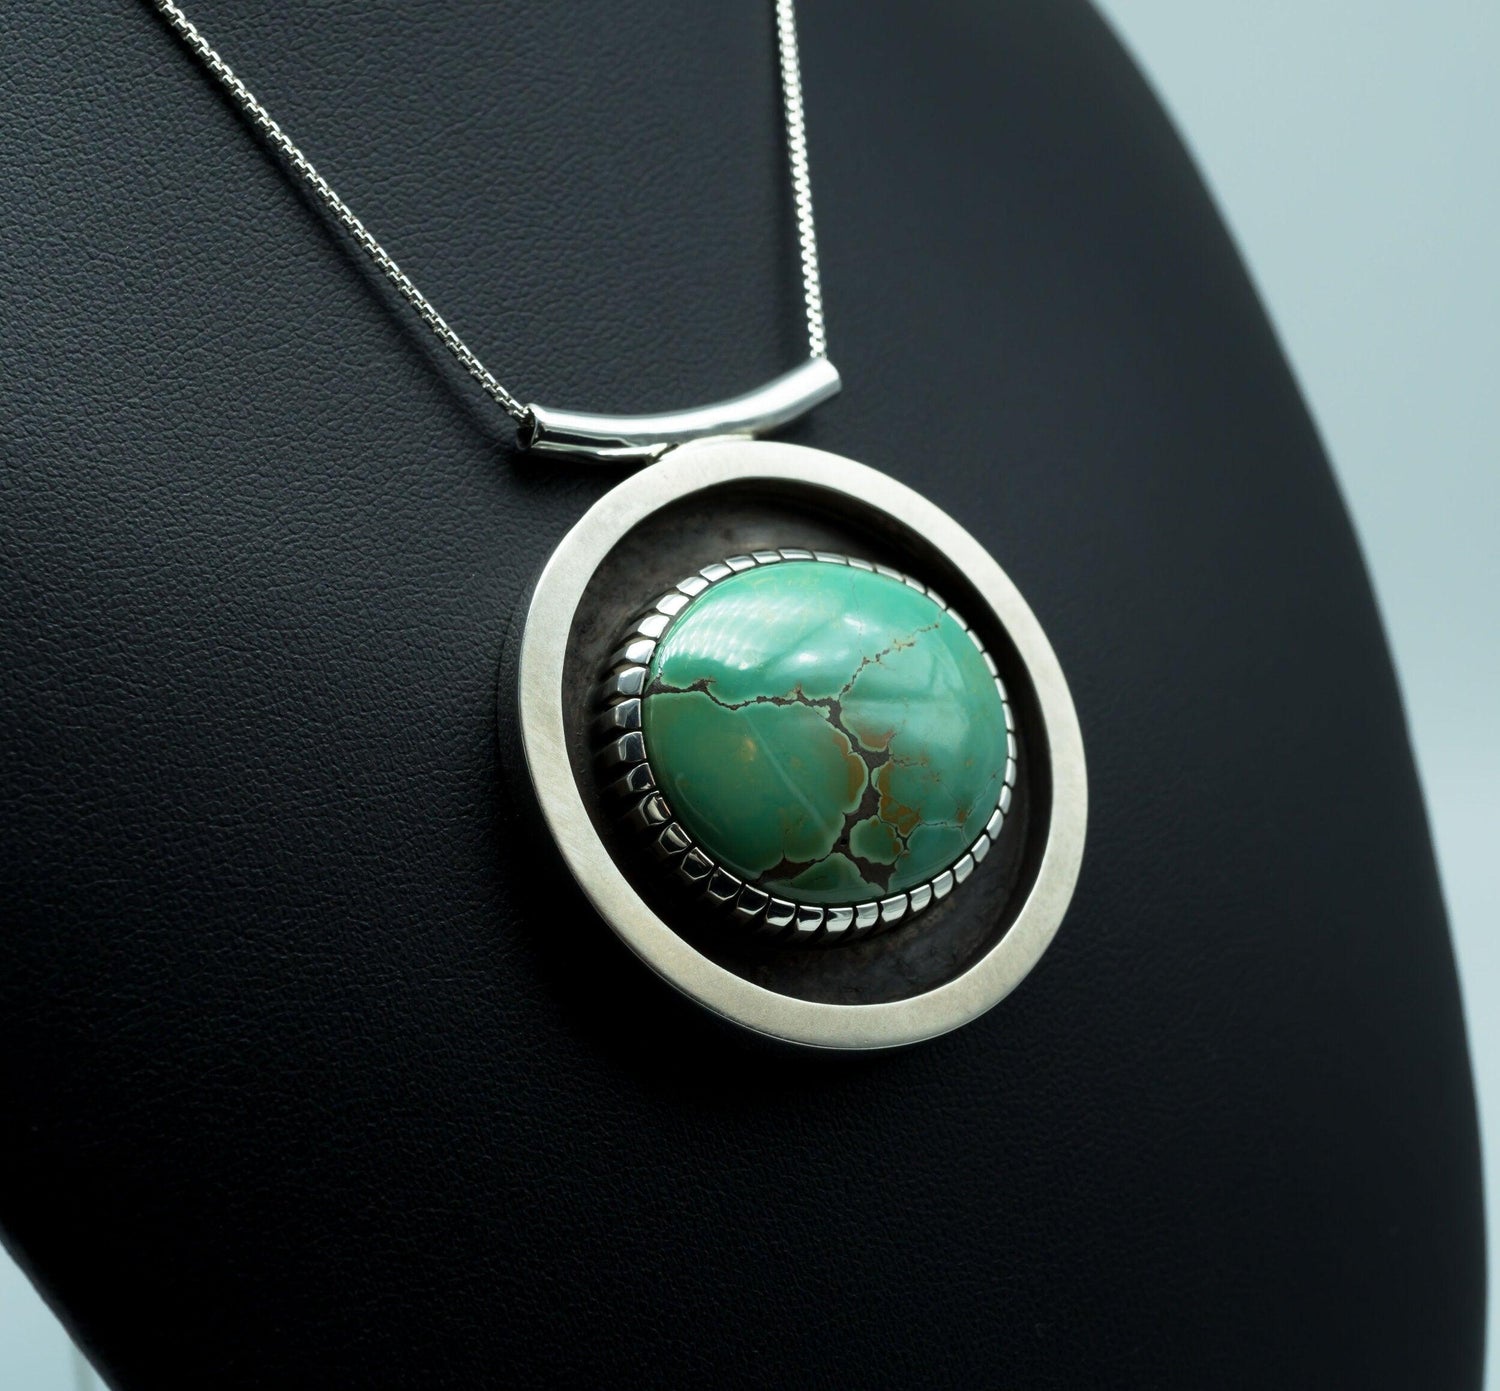 Tesselated Manassa Turquoise Pendant | .925 Silver | One of a kind - Ecotone Jewelers